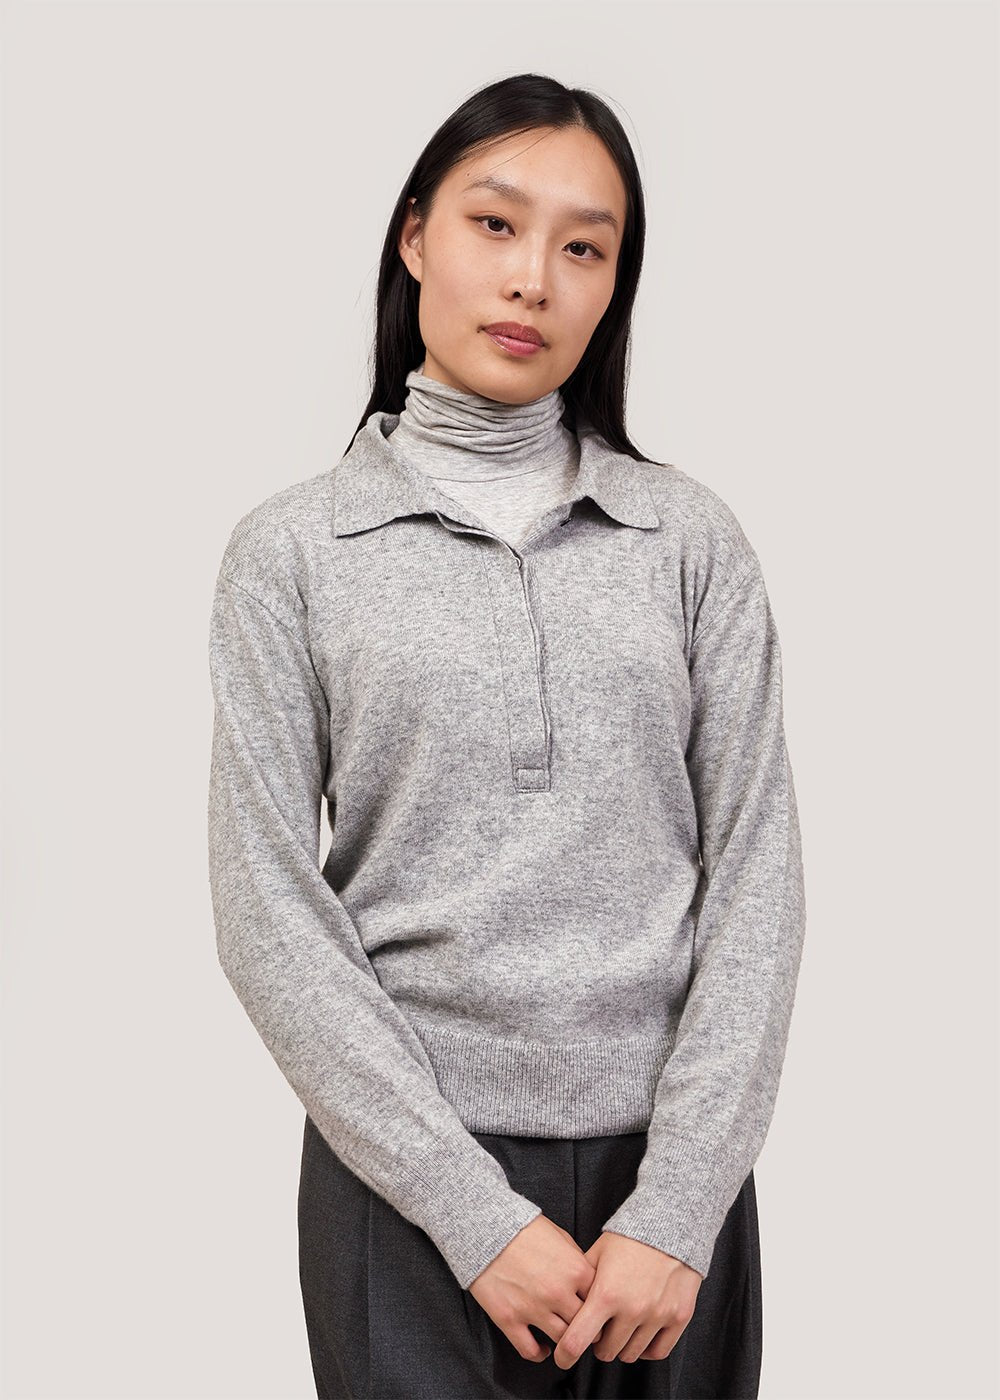 Mijeong Park Heather Grey Roll Neck Jersey Top - New Classics Studios Sustainable Ethical Fashion Canada